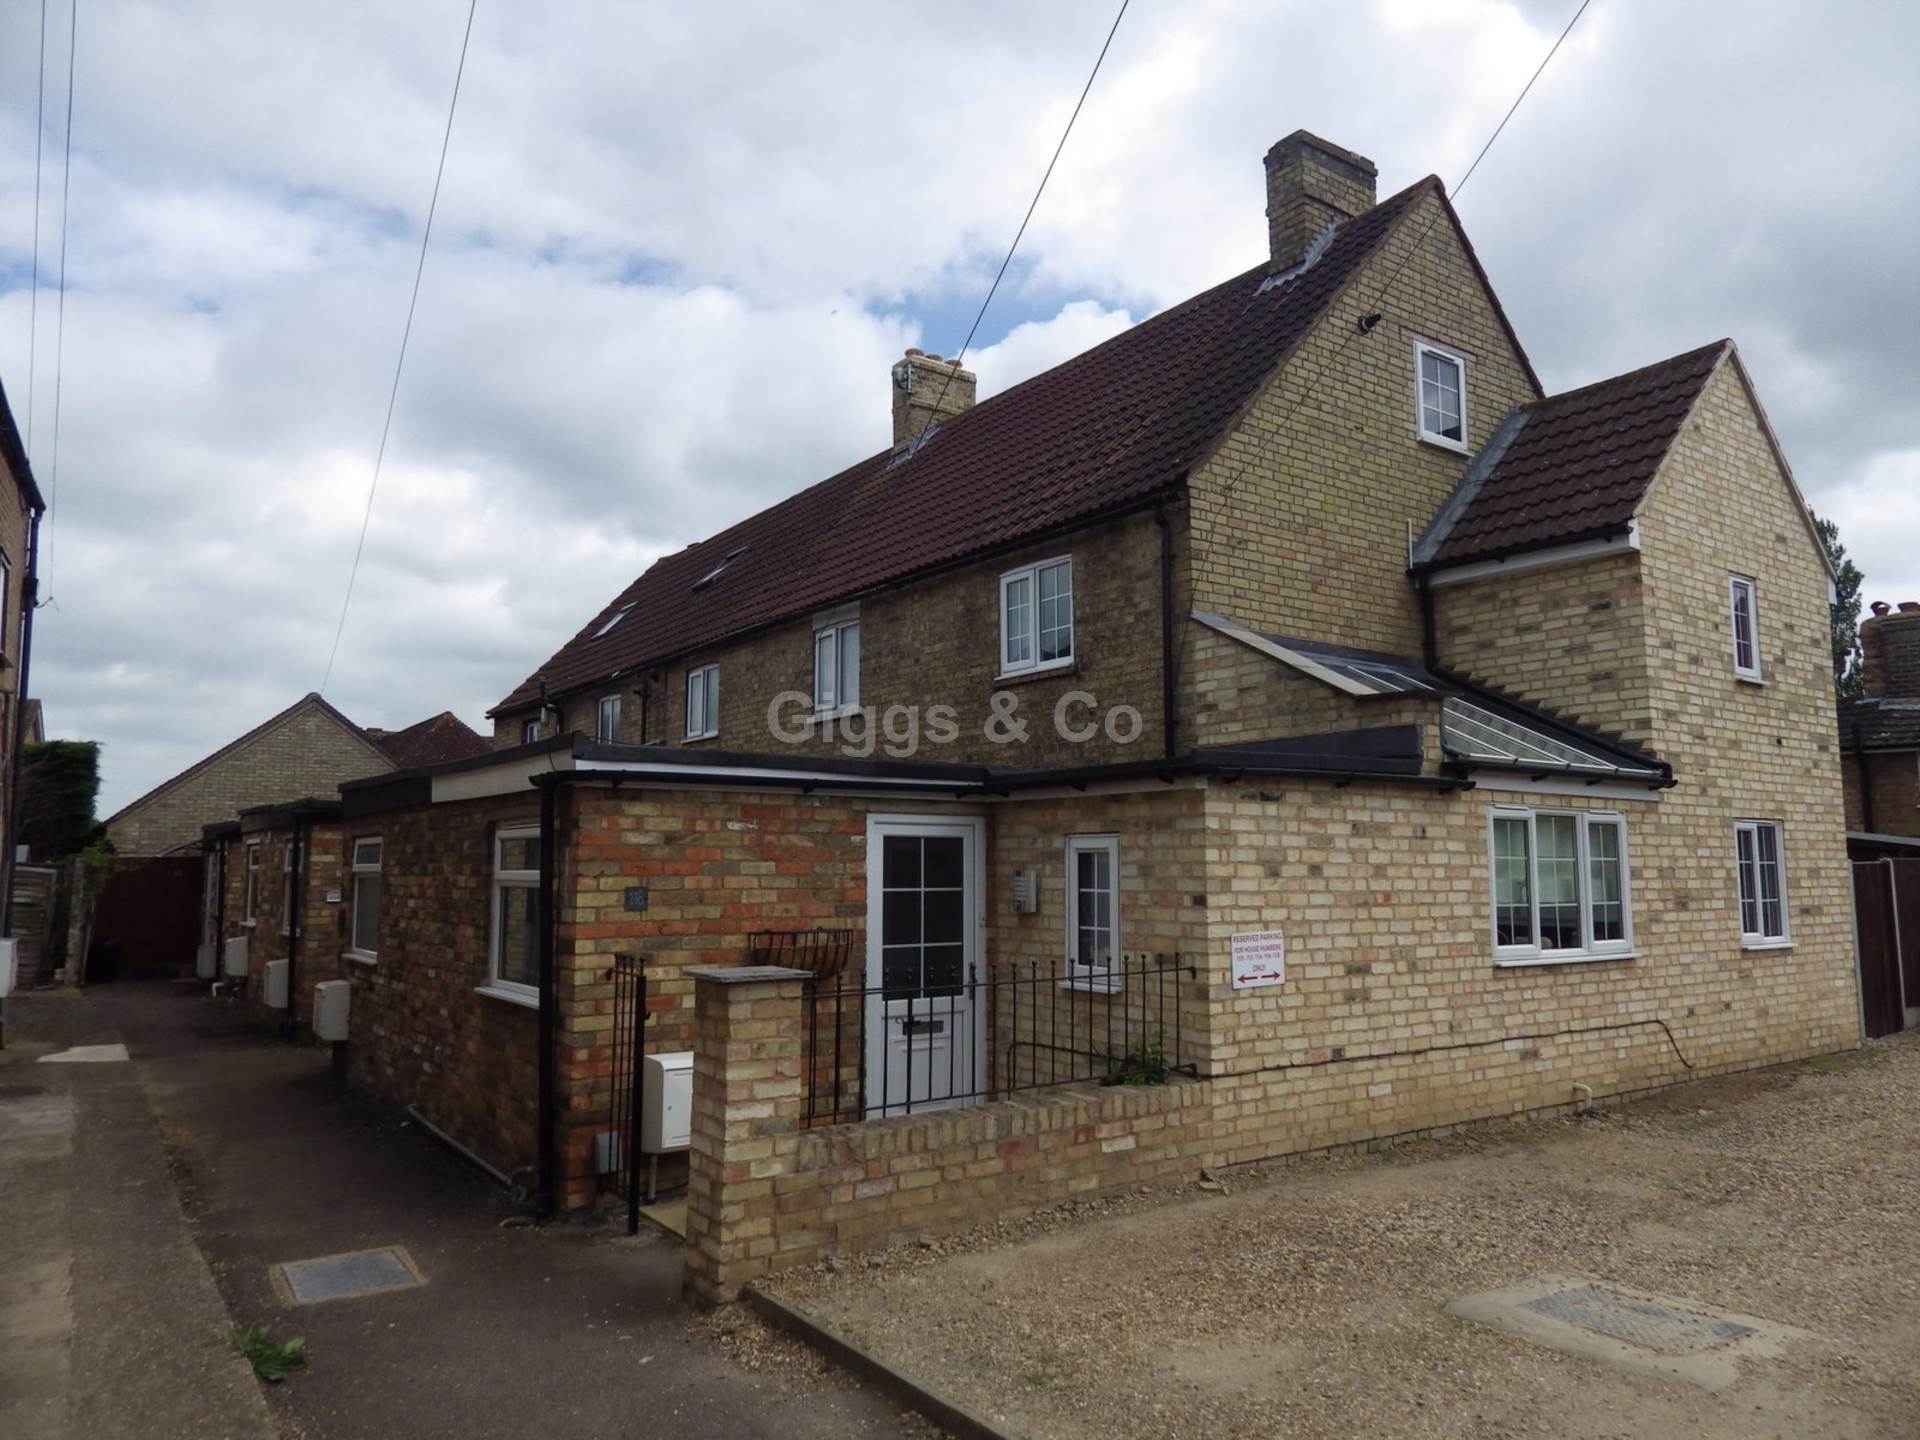 2 bed house to rent in Great North Road, Eaton Socon, St Neots - Property Image 1